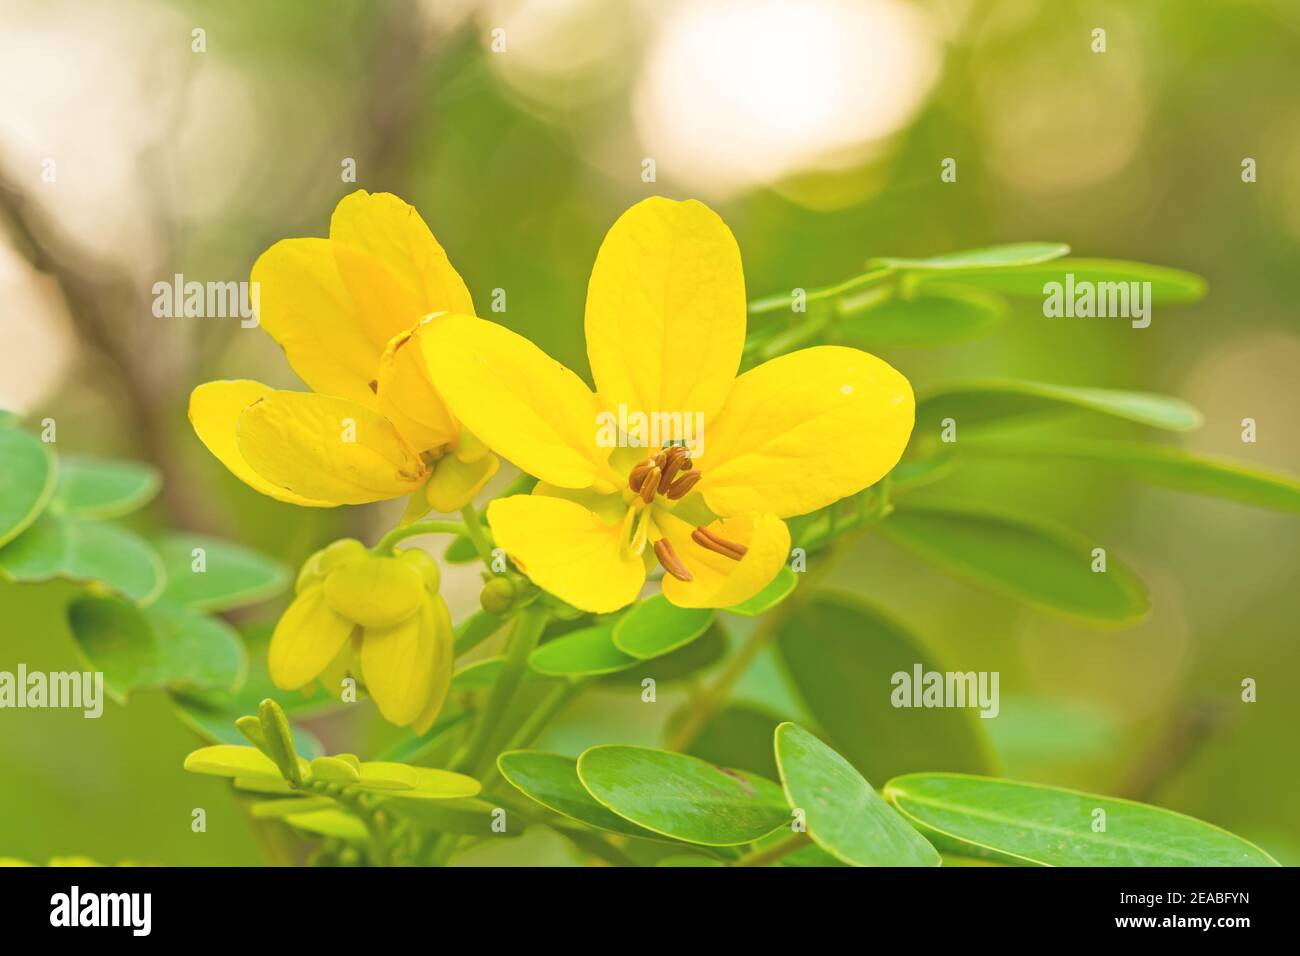 Closed up yellow flower American Cassia or Golden Wonder Stock Photo